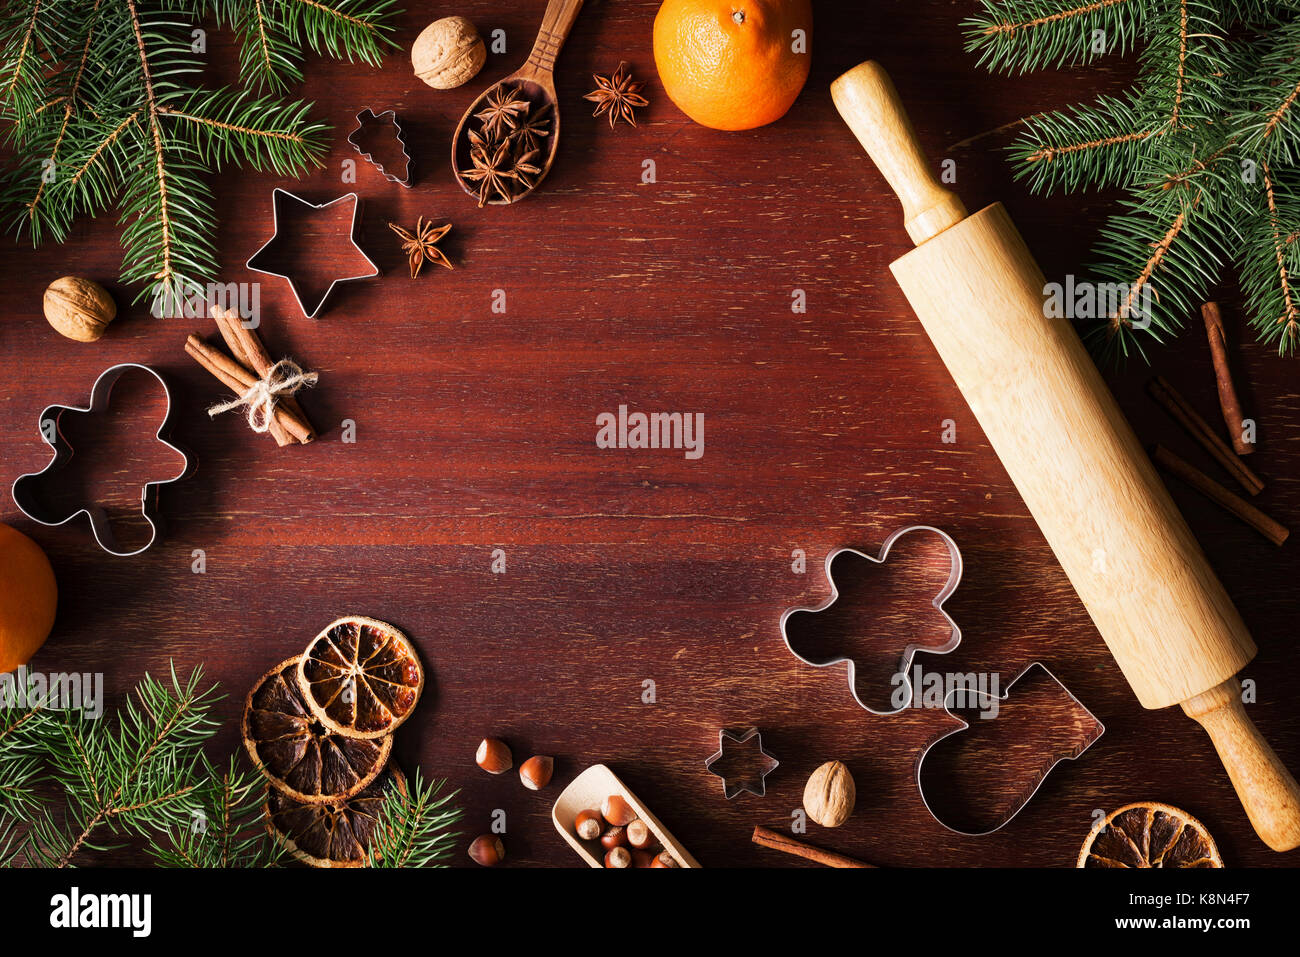 Winter holidays Christmas New Year background with cookie cutters, spices, nuts, Christmas tree and Gingerbread cookies on wooden background. Top view Stock Photo